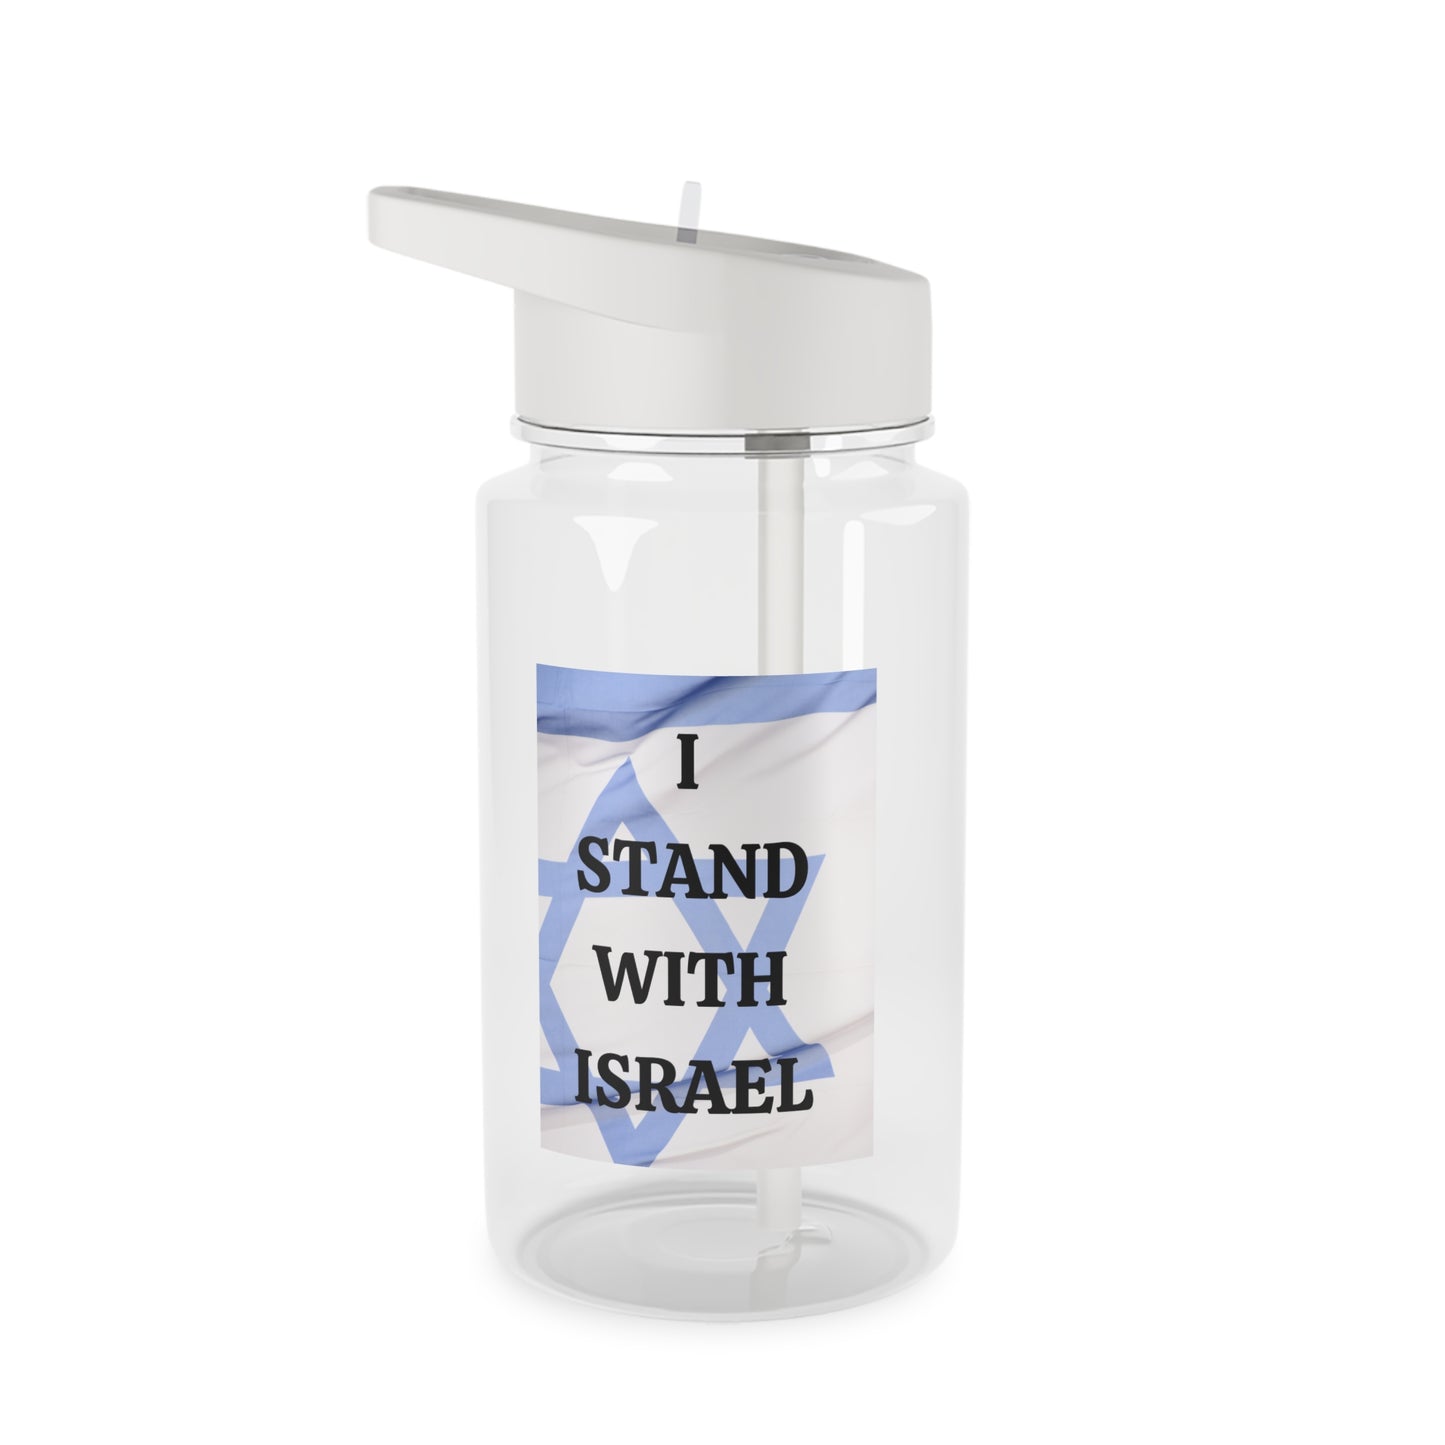 I stand with Israel - Tritan Water Bottle